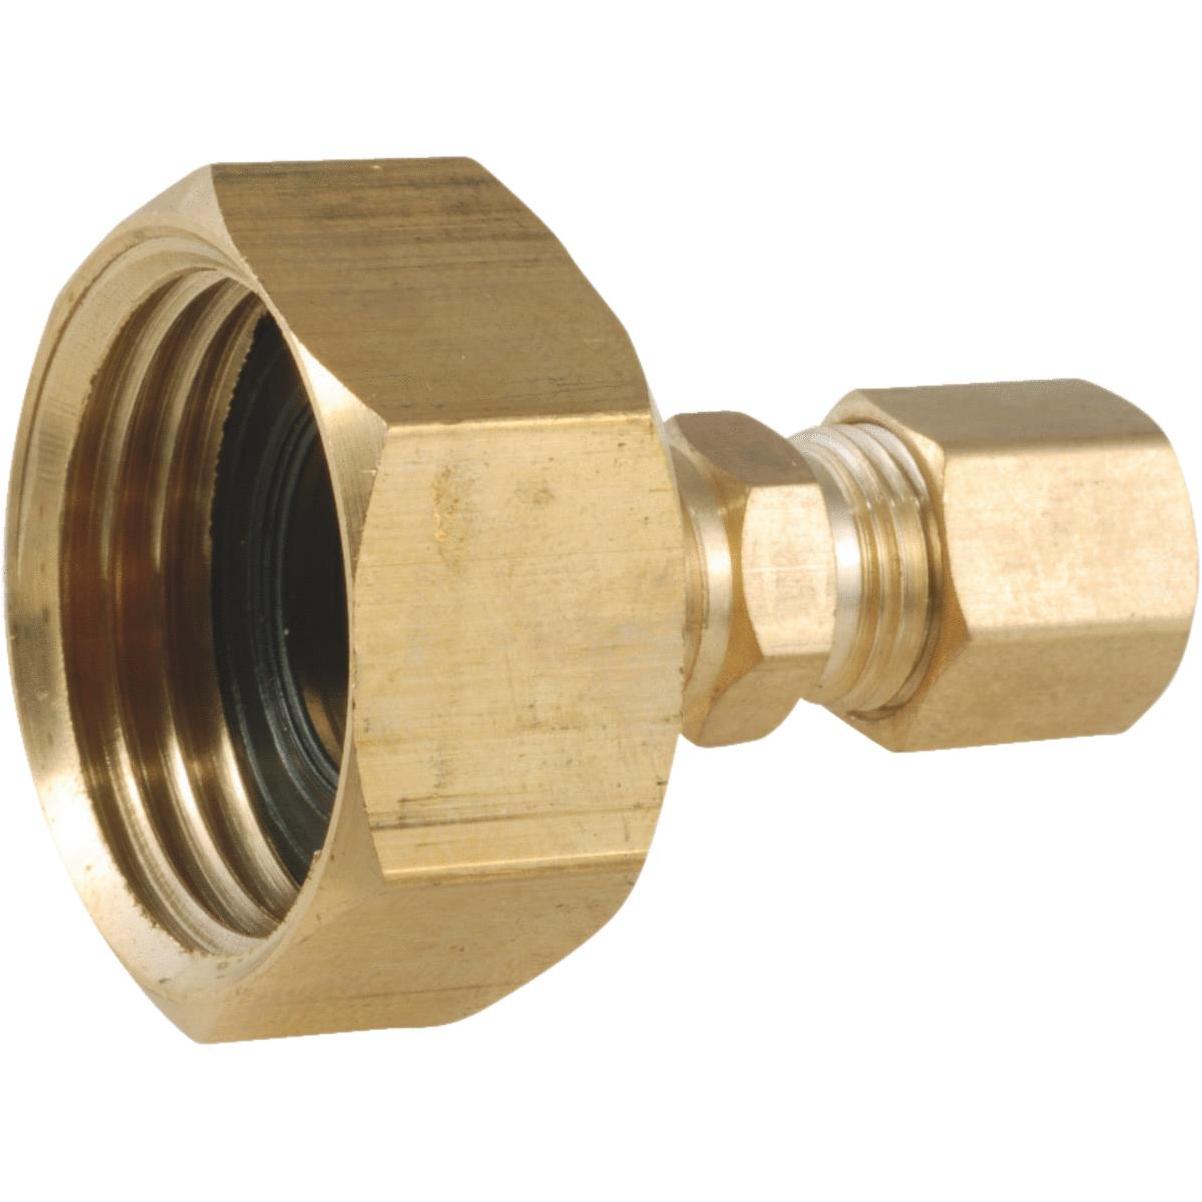 Anderson Metals 3/8 x 1/4 Brass Low Lead Compression Union